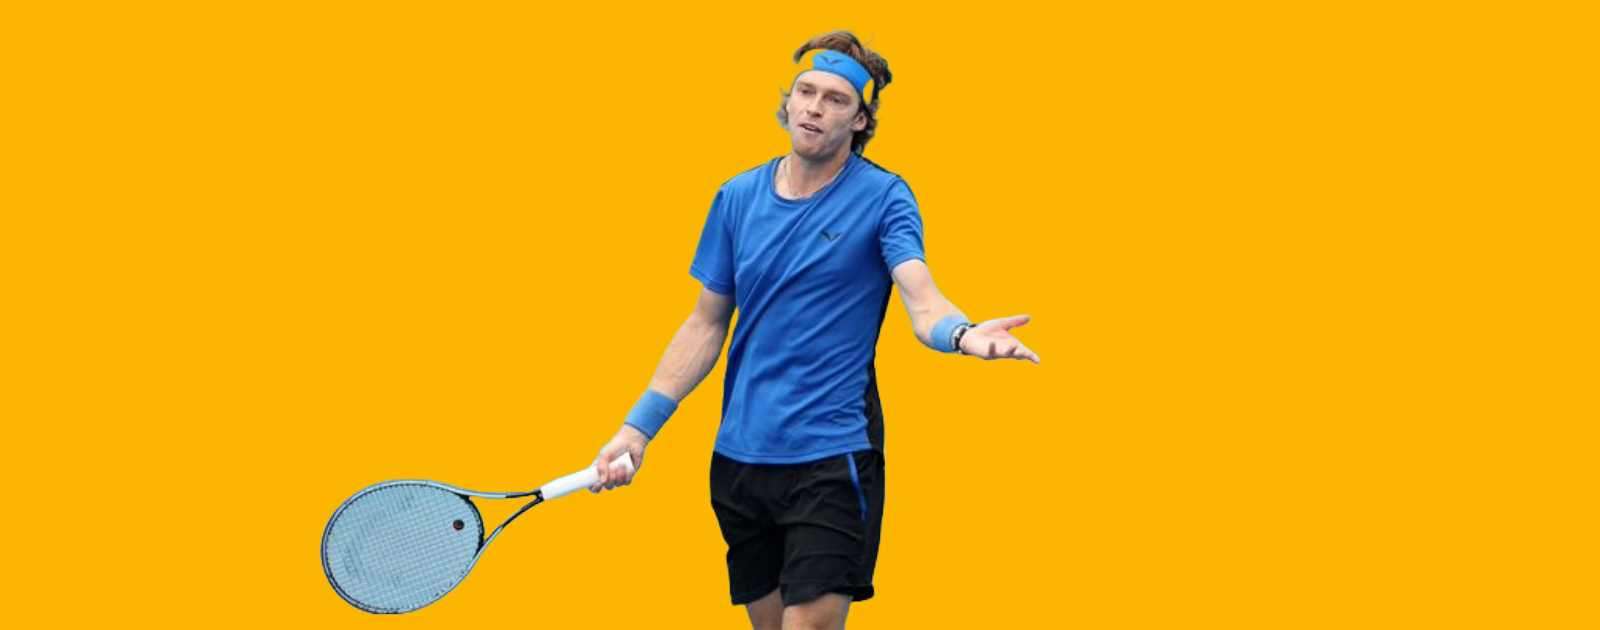 Why Does Andrey Rublev Not Have a Flag? The Russian Tennis Players